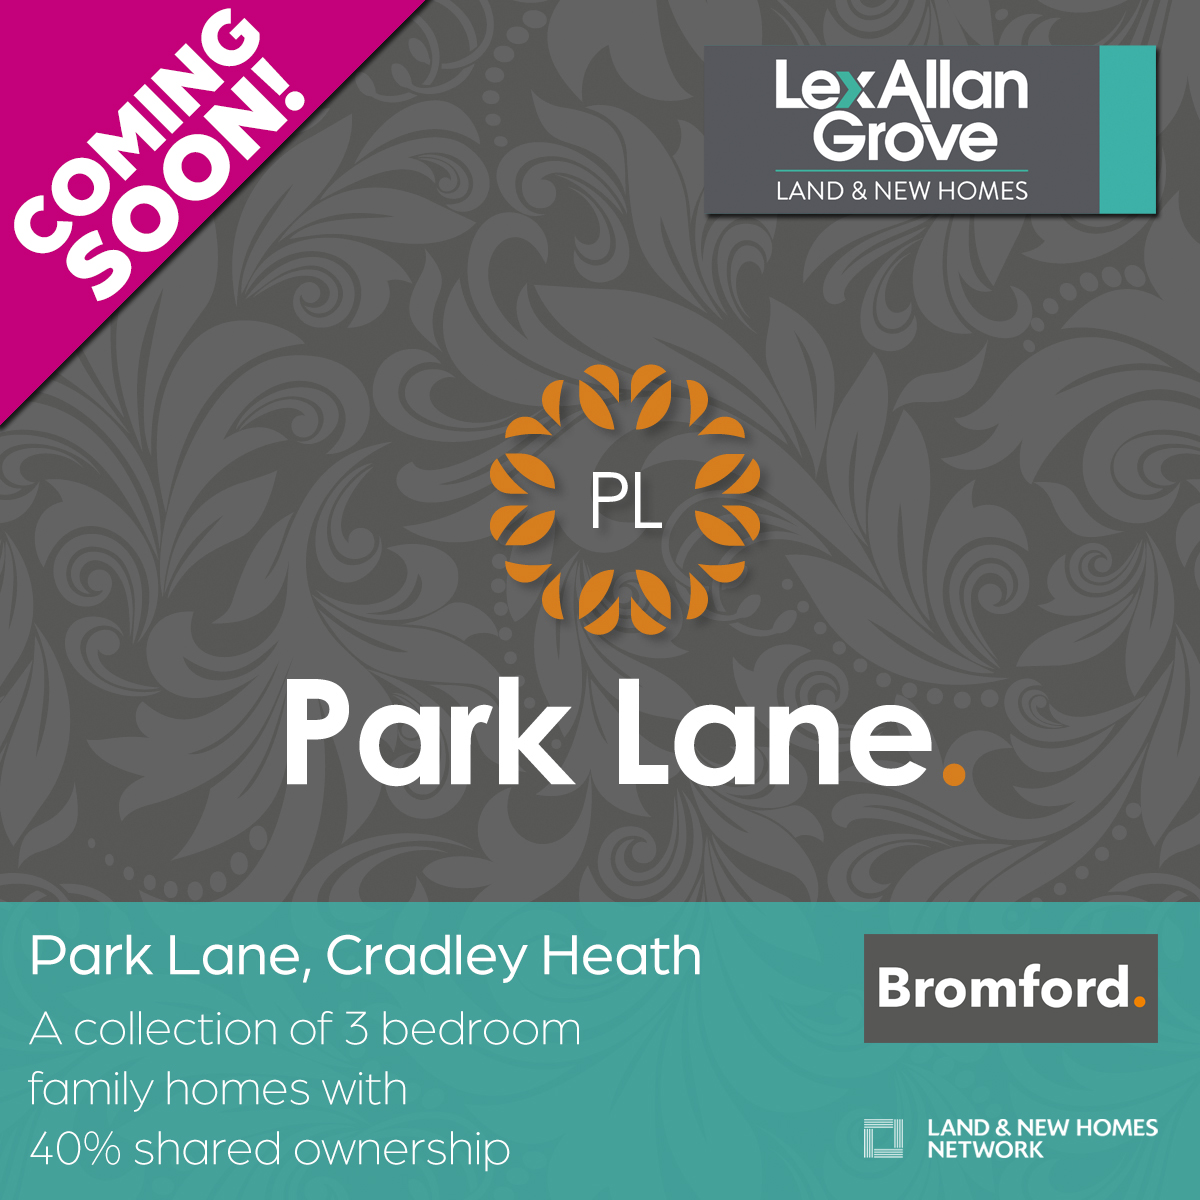 👀 COMING SOON! Park Lane in #CradleyHeath ✨🏡
🛏️ 3 Bedroom, 40% shared ownership homes
📍 Highly sought-after location
🚸 Excellent schools nearby
🚙 Close to convenient commuter links 🚄🚈
#EstateAgents #newhomes #Halesowen #Birmingham #westmidlands
lexallan.co.uk/property-devel…